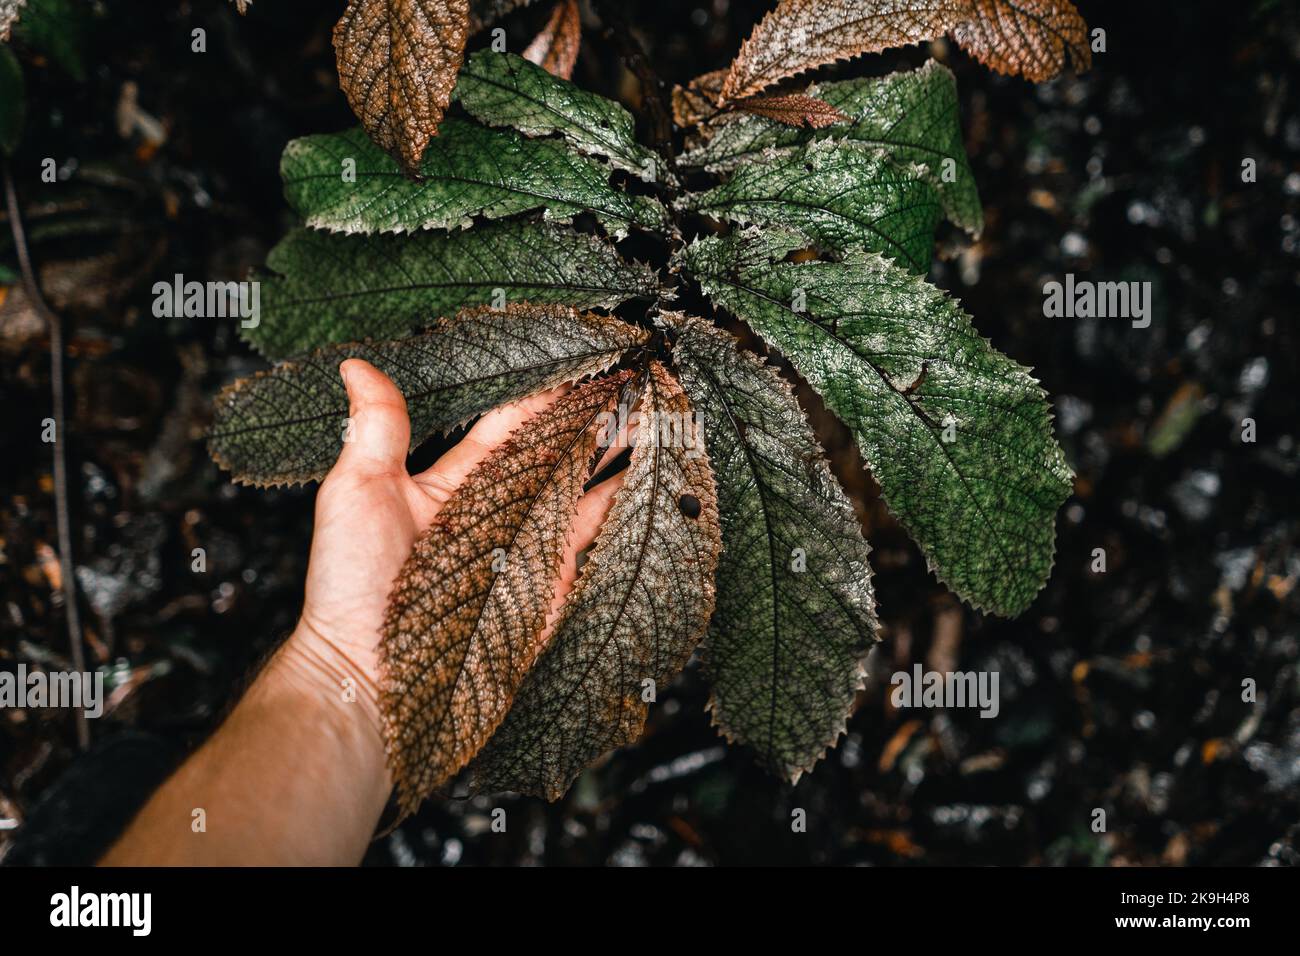 plant with long leaves with pointed edges and a deep green color caressed by the left hand of a young caucasian man among the forest plants in Stock Photo